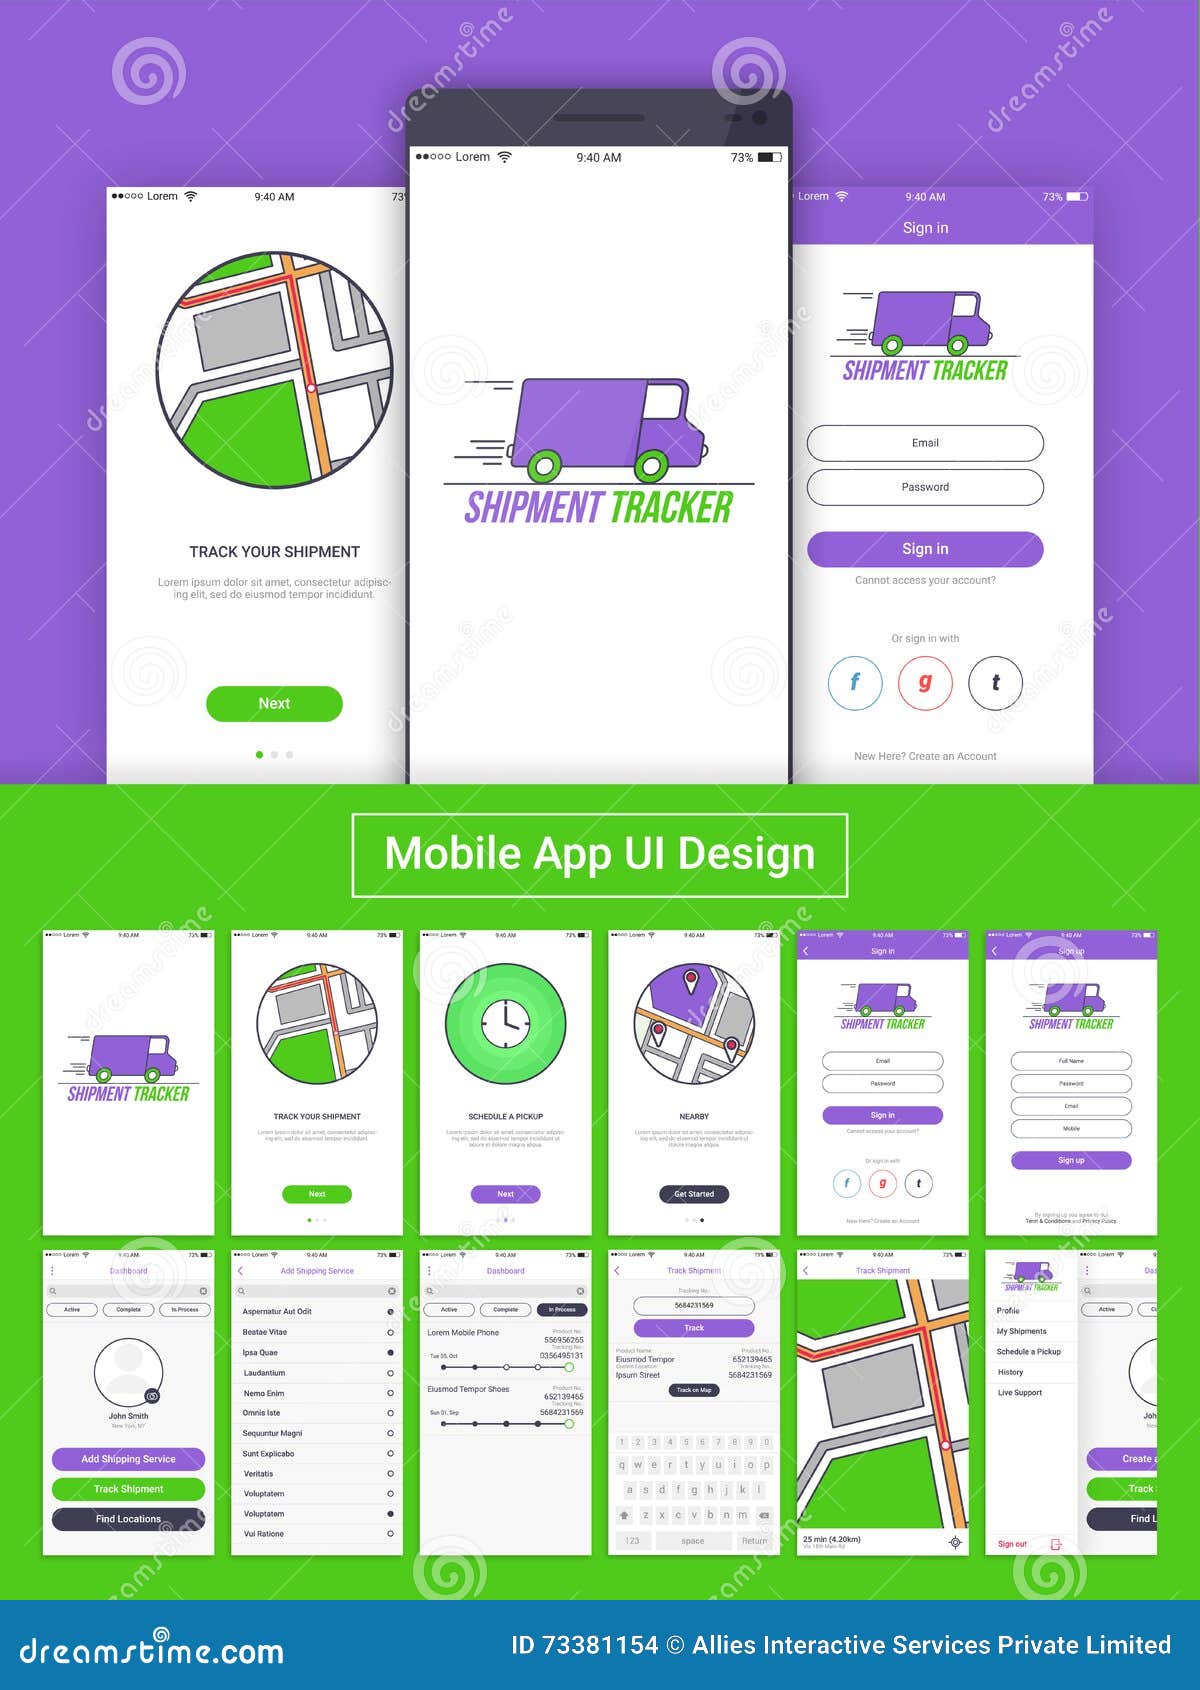 1234567890 designs, themes, templates and downloadable graphic